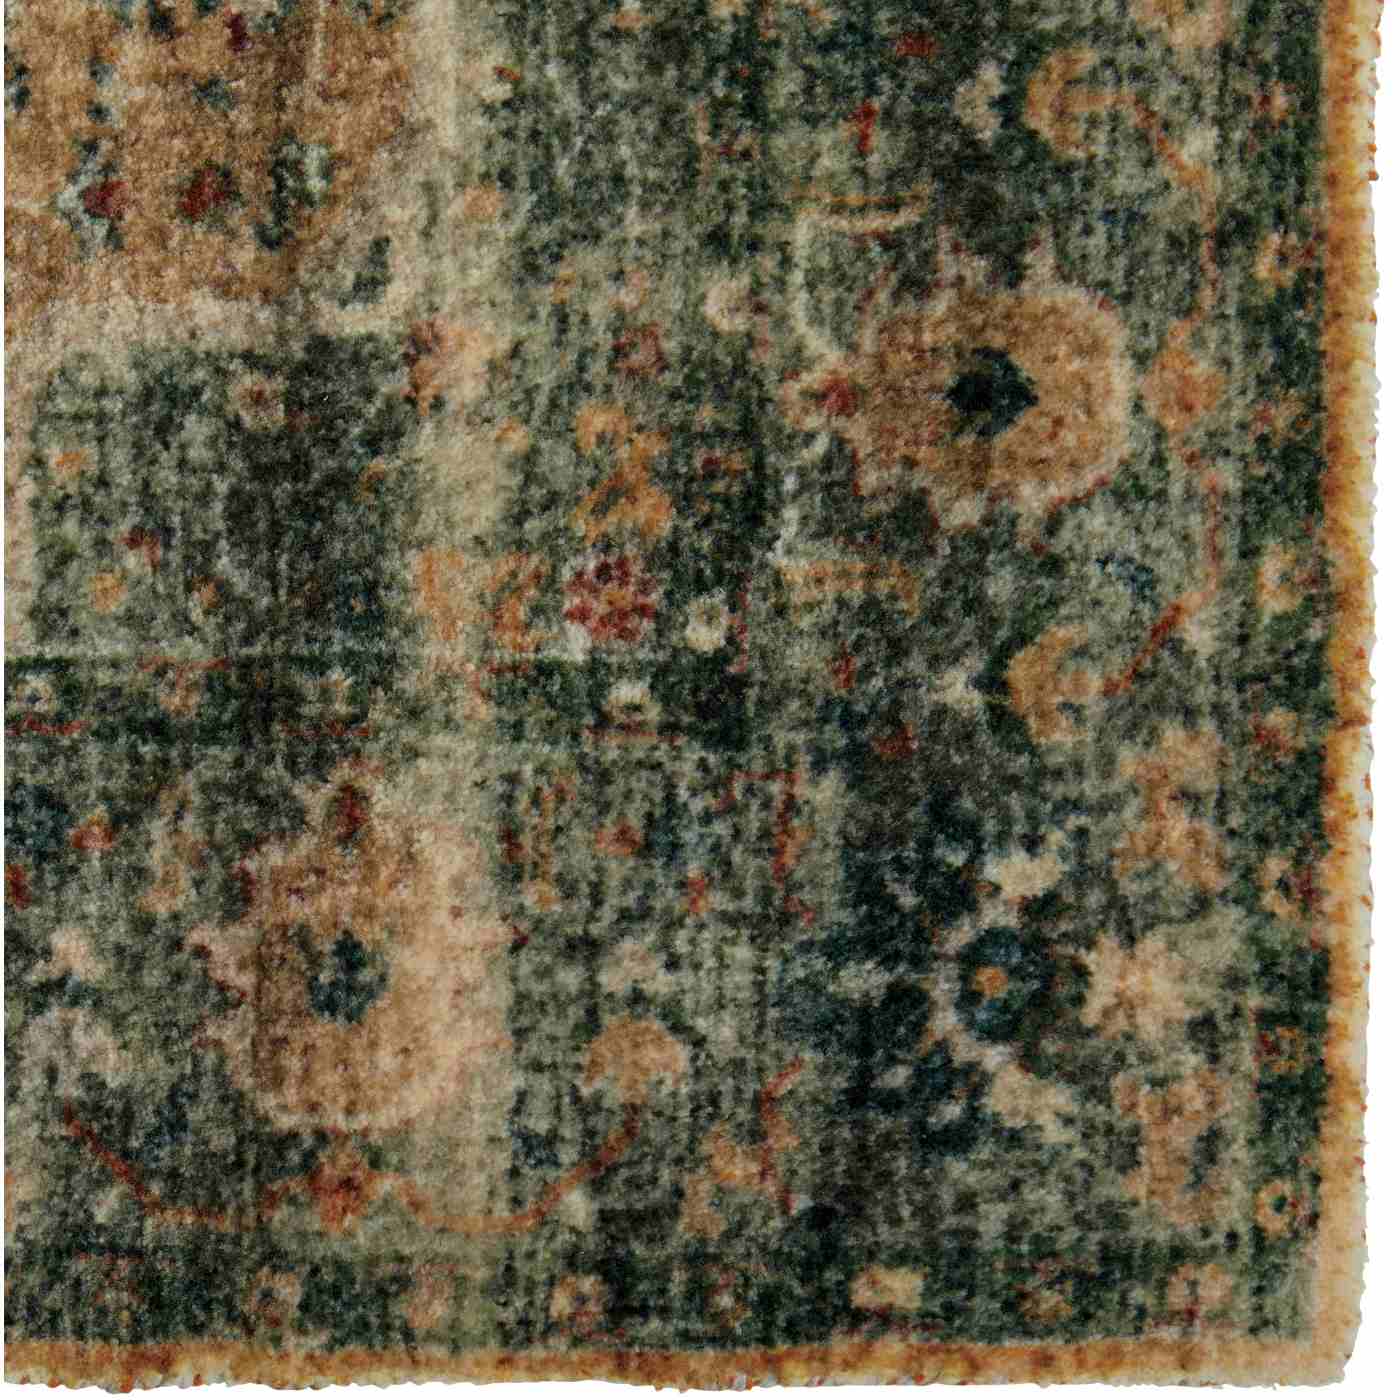 Haven + Key Nylon Accent Rug - Blue & Tan; image 2 of 2